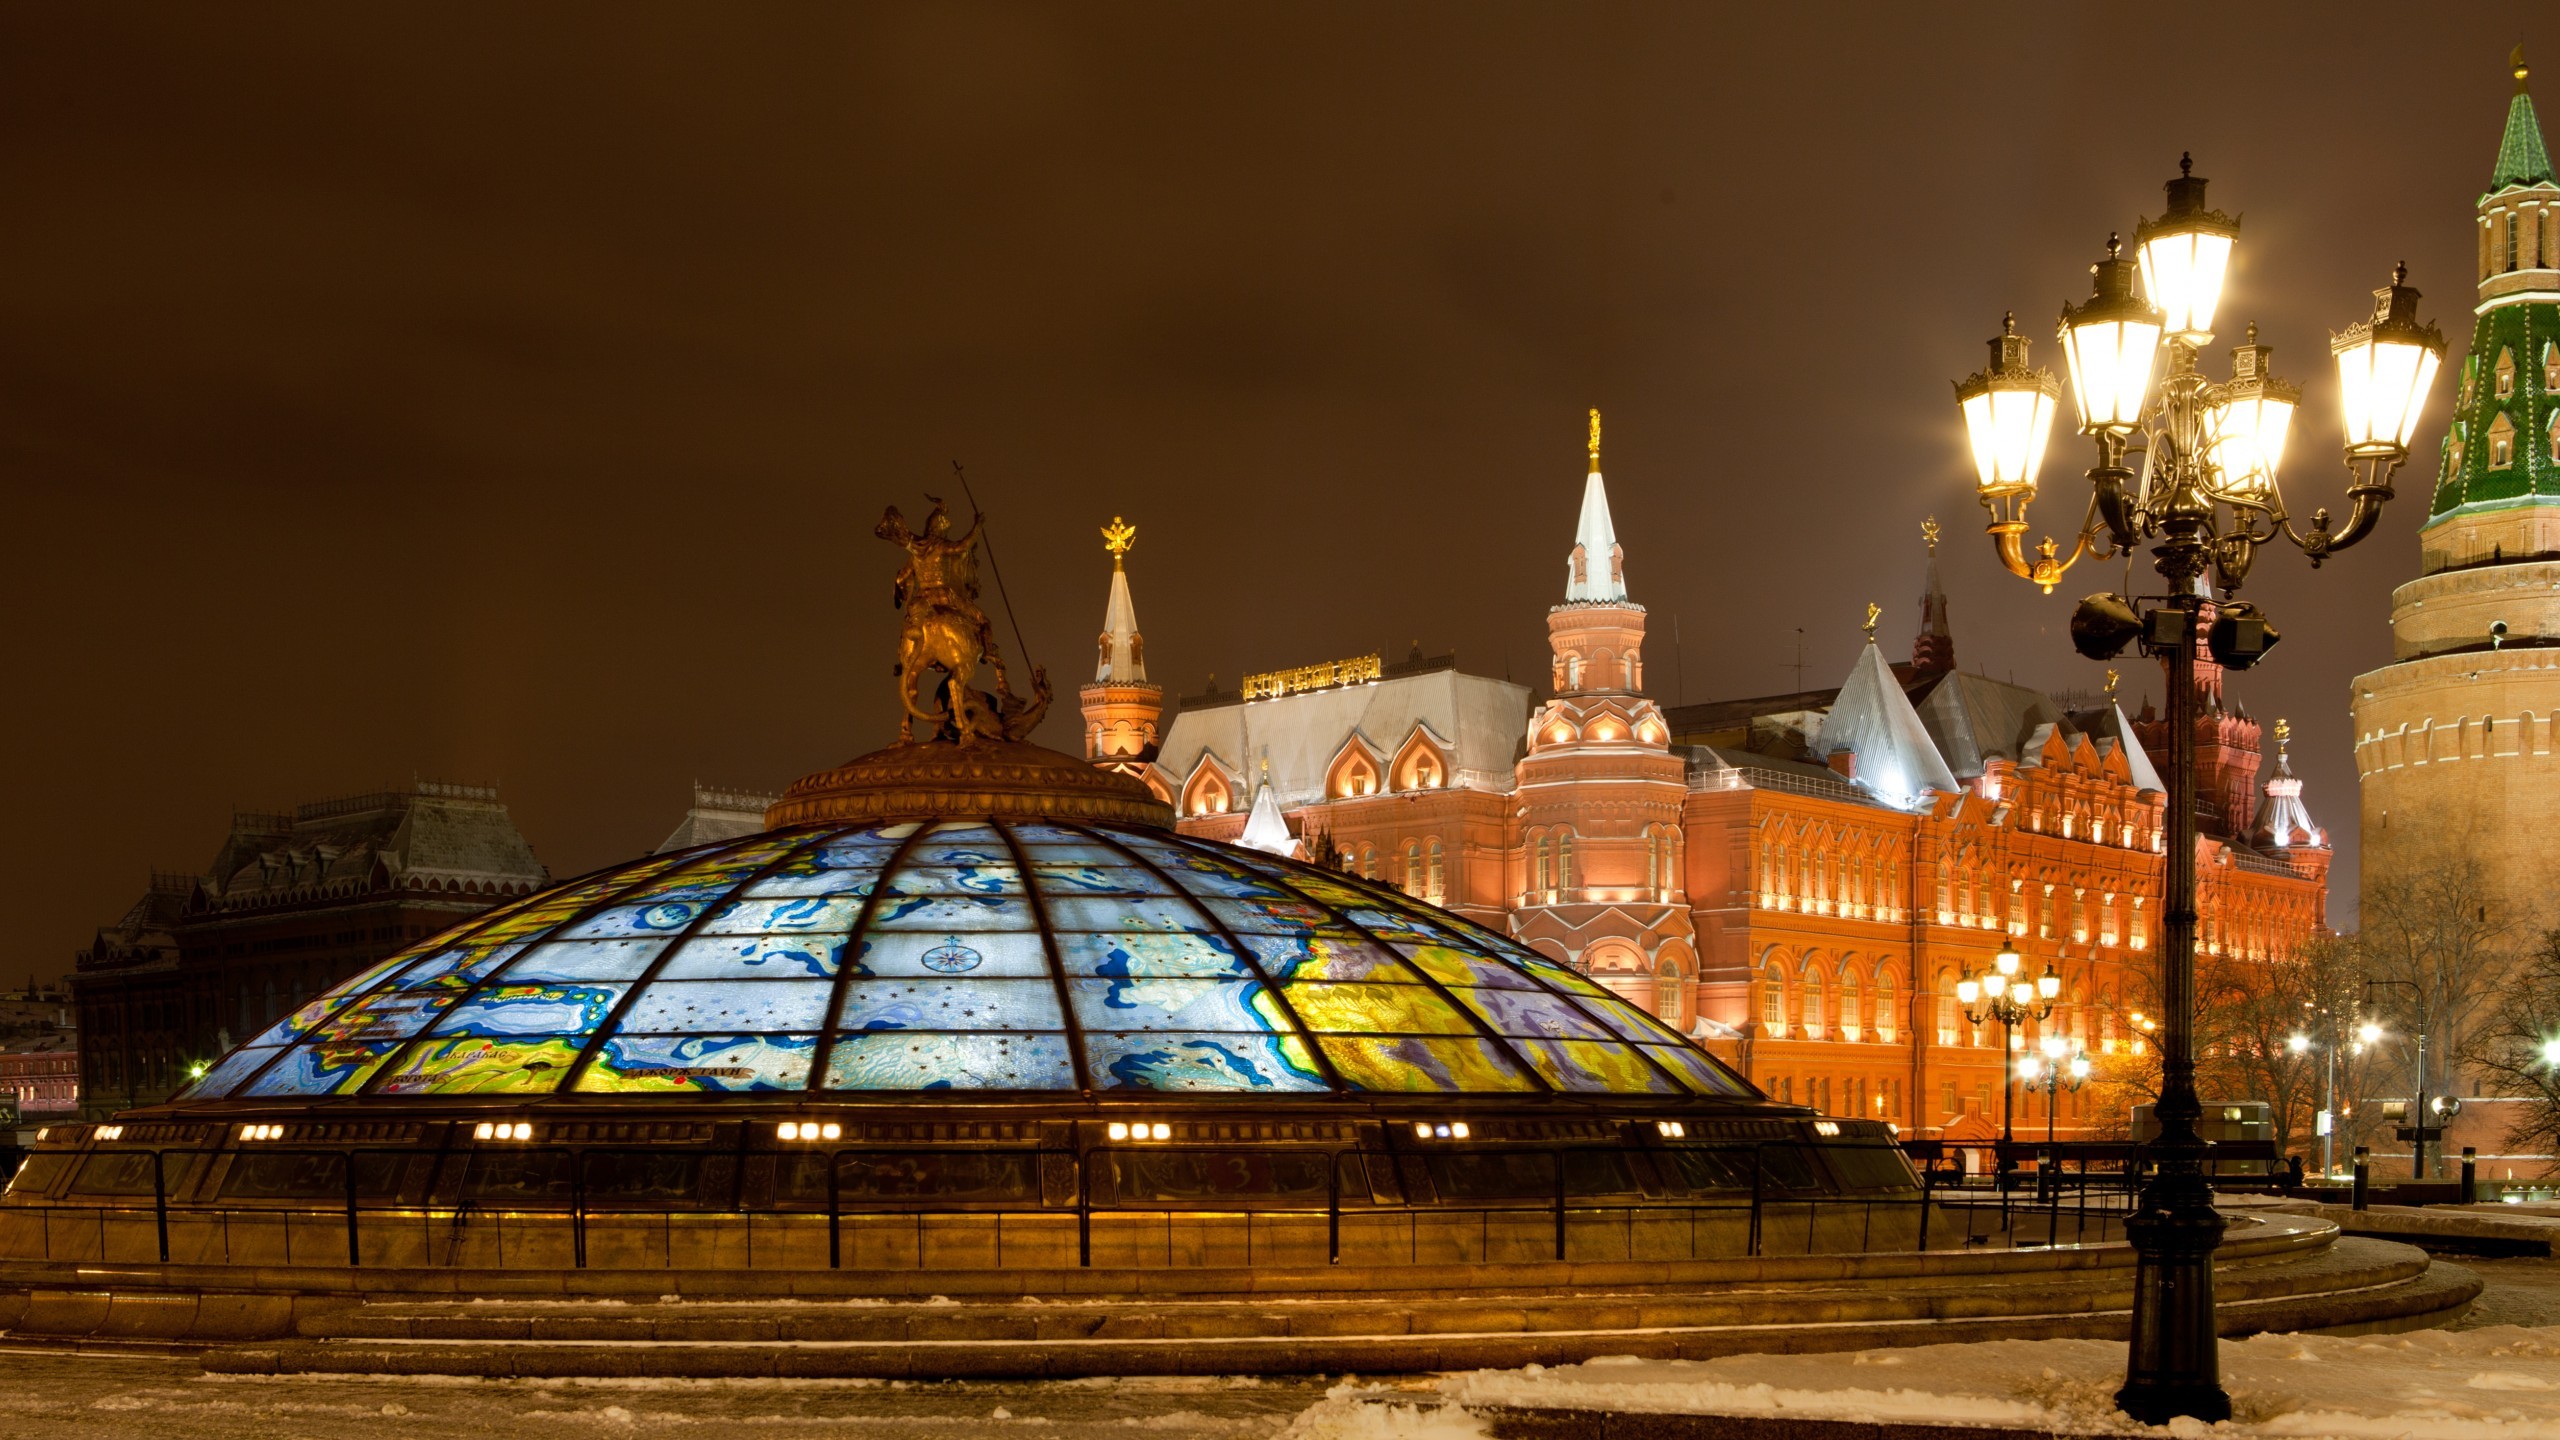 Architecture Building City Moscow Russia Capital Night Street Light Lamp Winter Snow Statue Tower Me 2560x1440